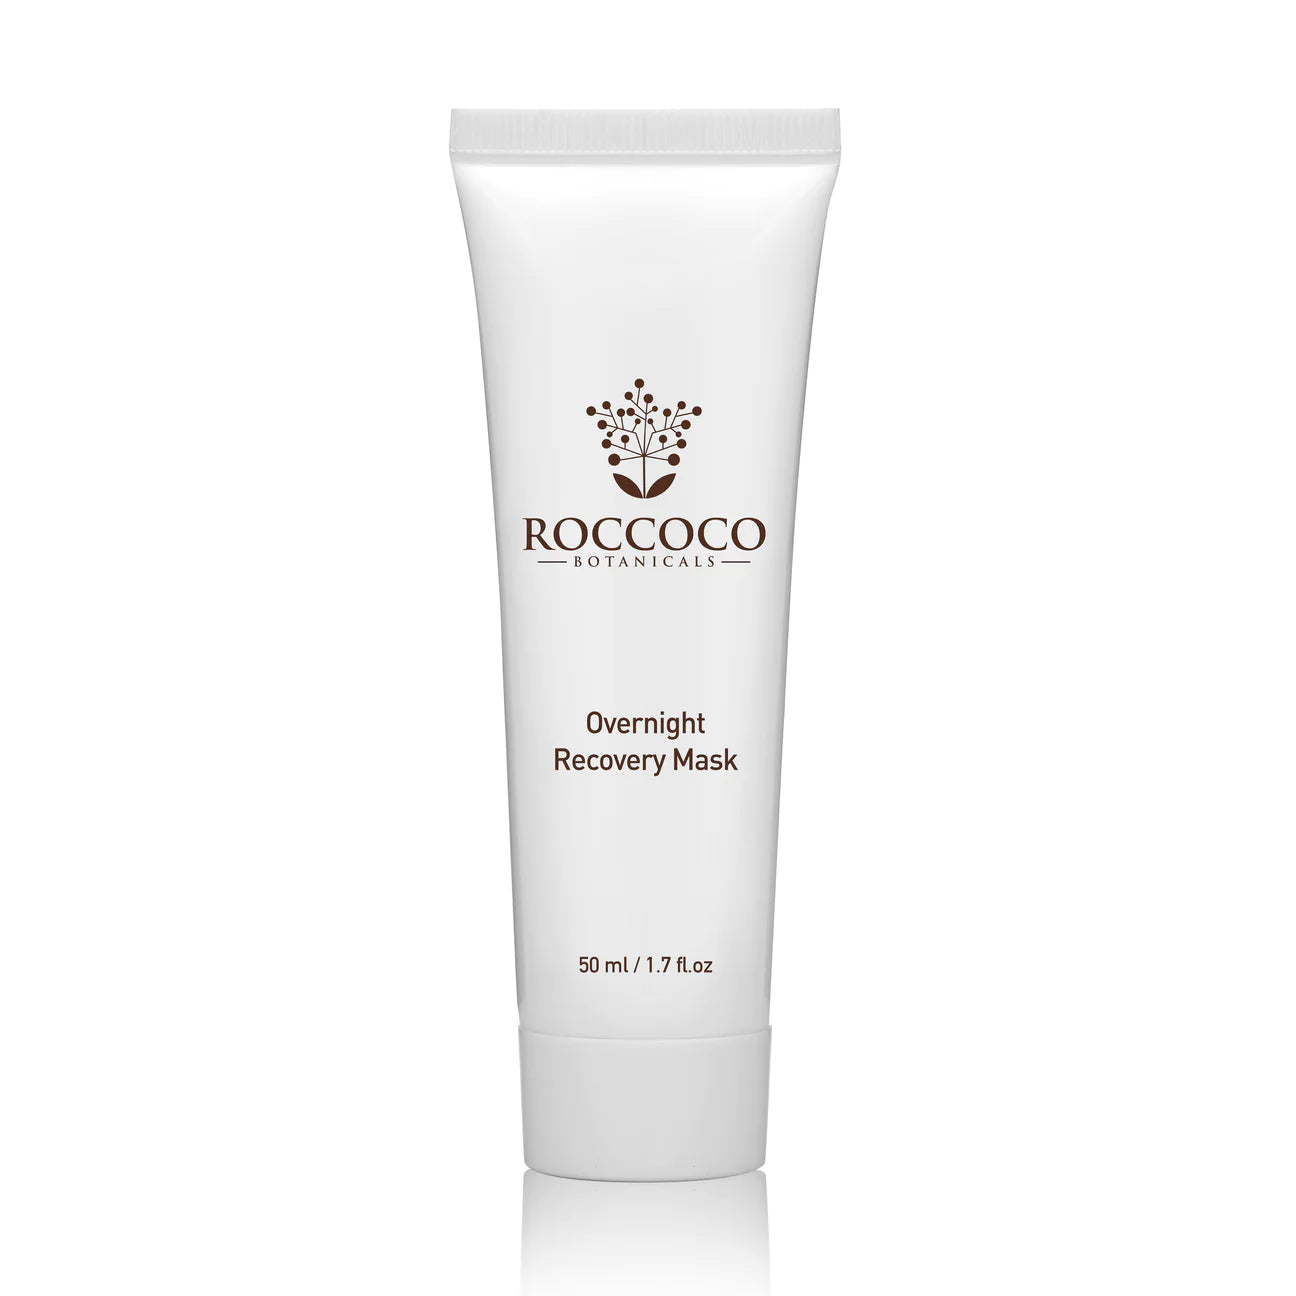 Roccoco Botanicals Overnight Recovery Mask